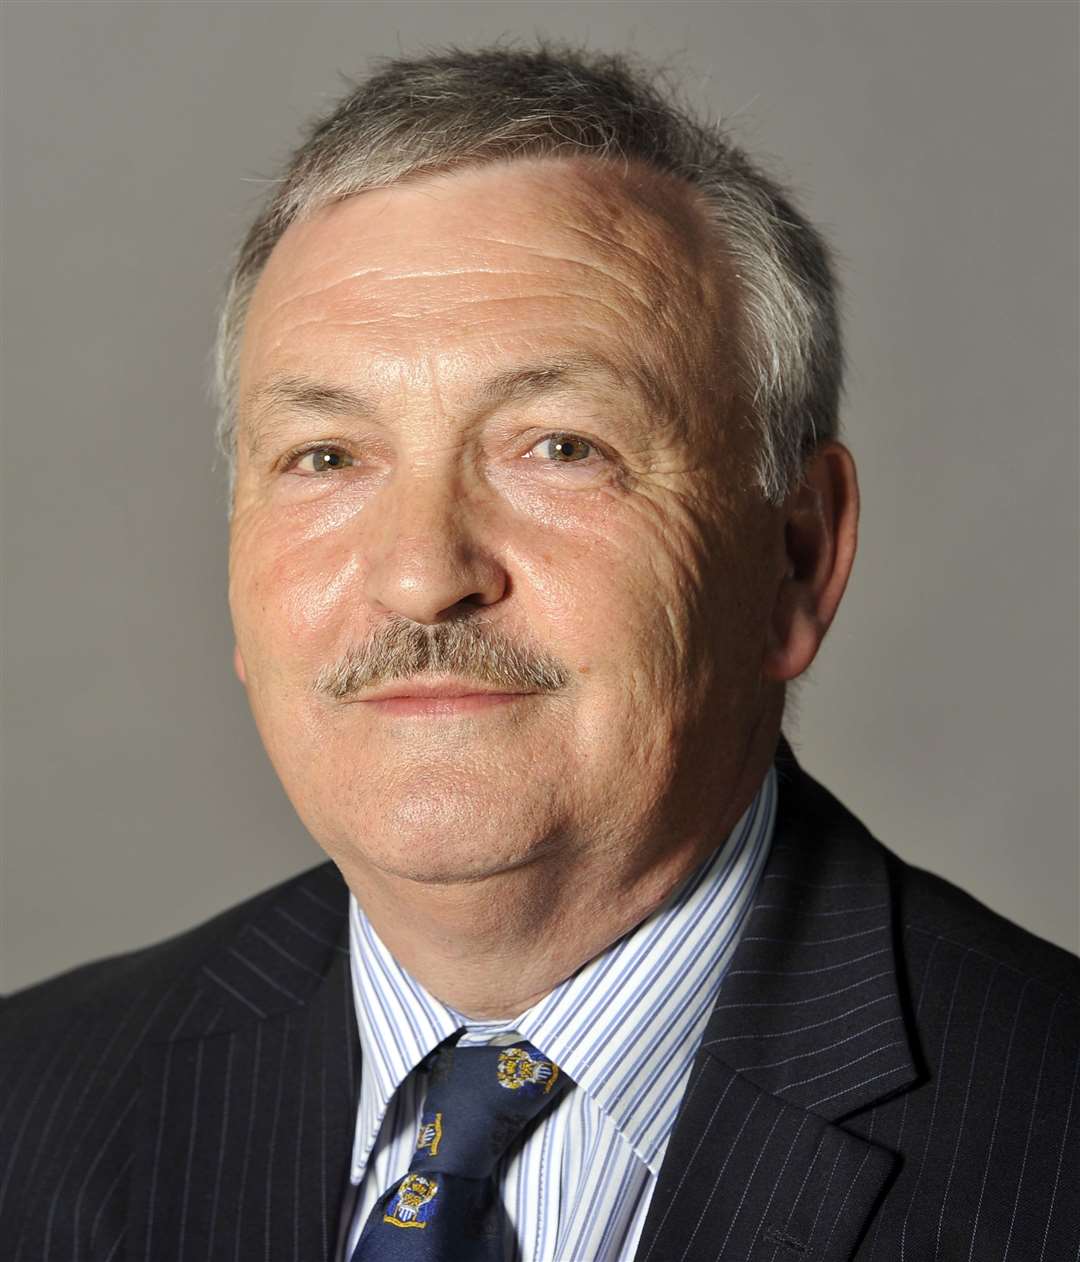 Medway Council leader Alan Jarrett fears government house-building plans